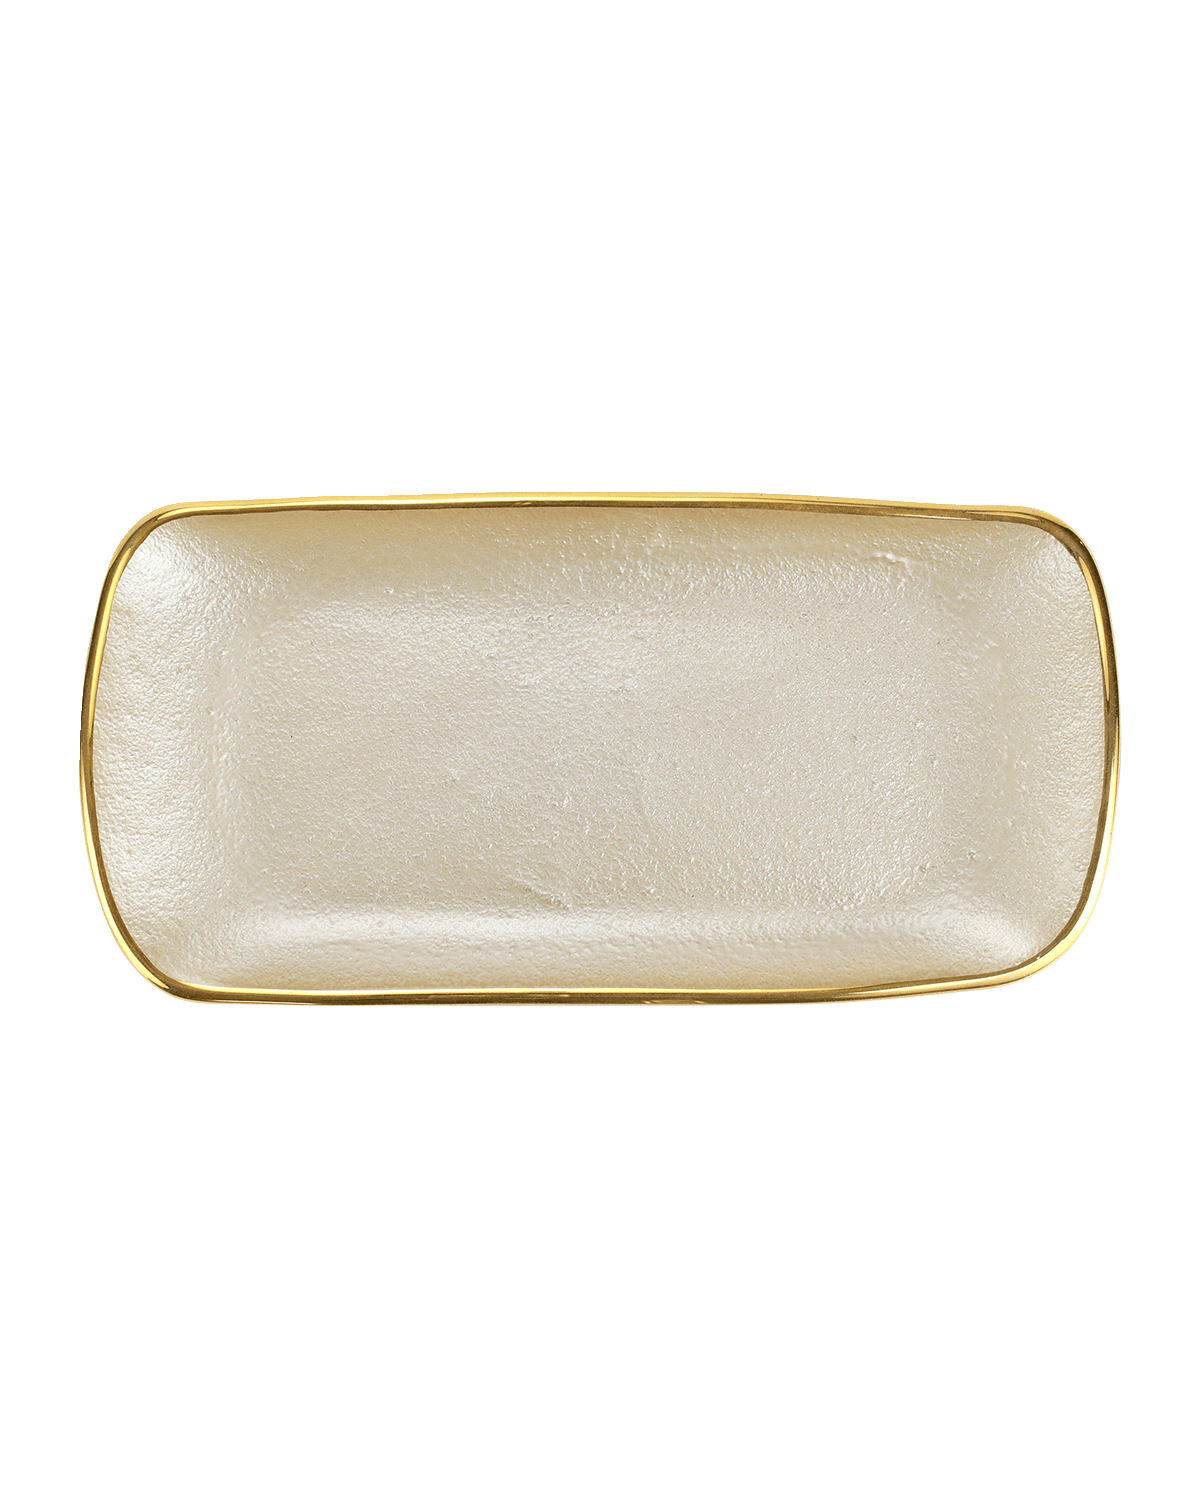 Herend Golden Edge Square Tray with Handles | Neiman Marcus